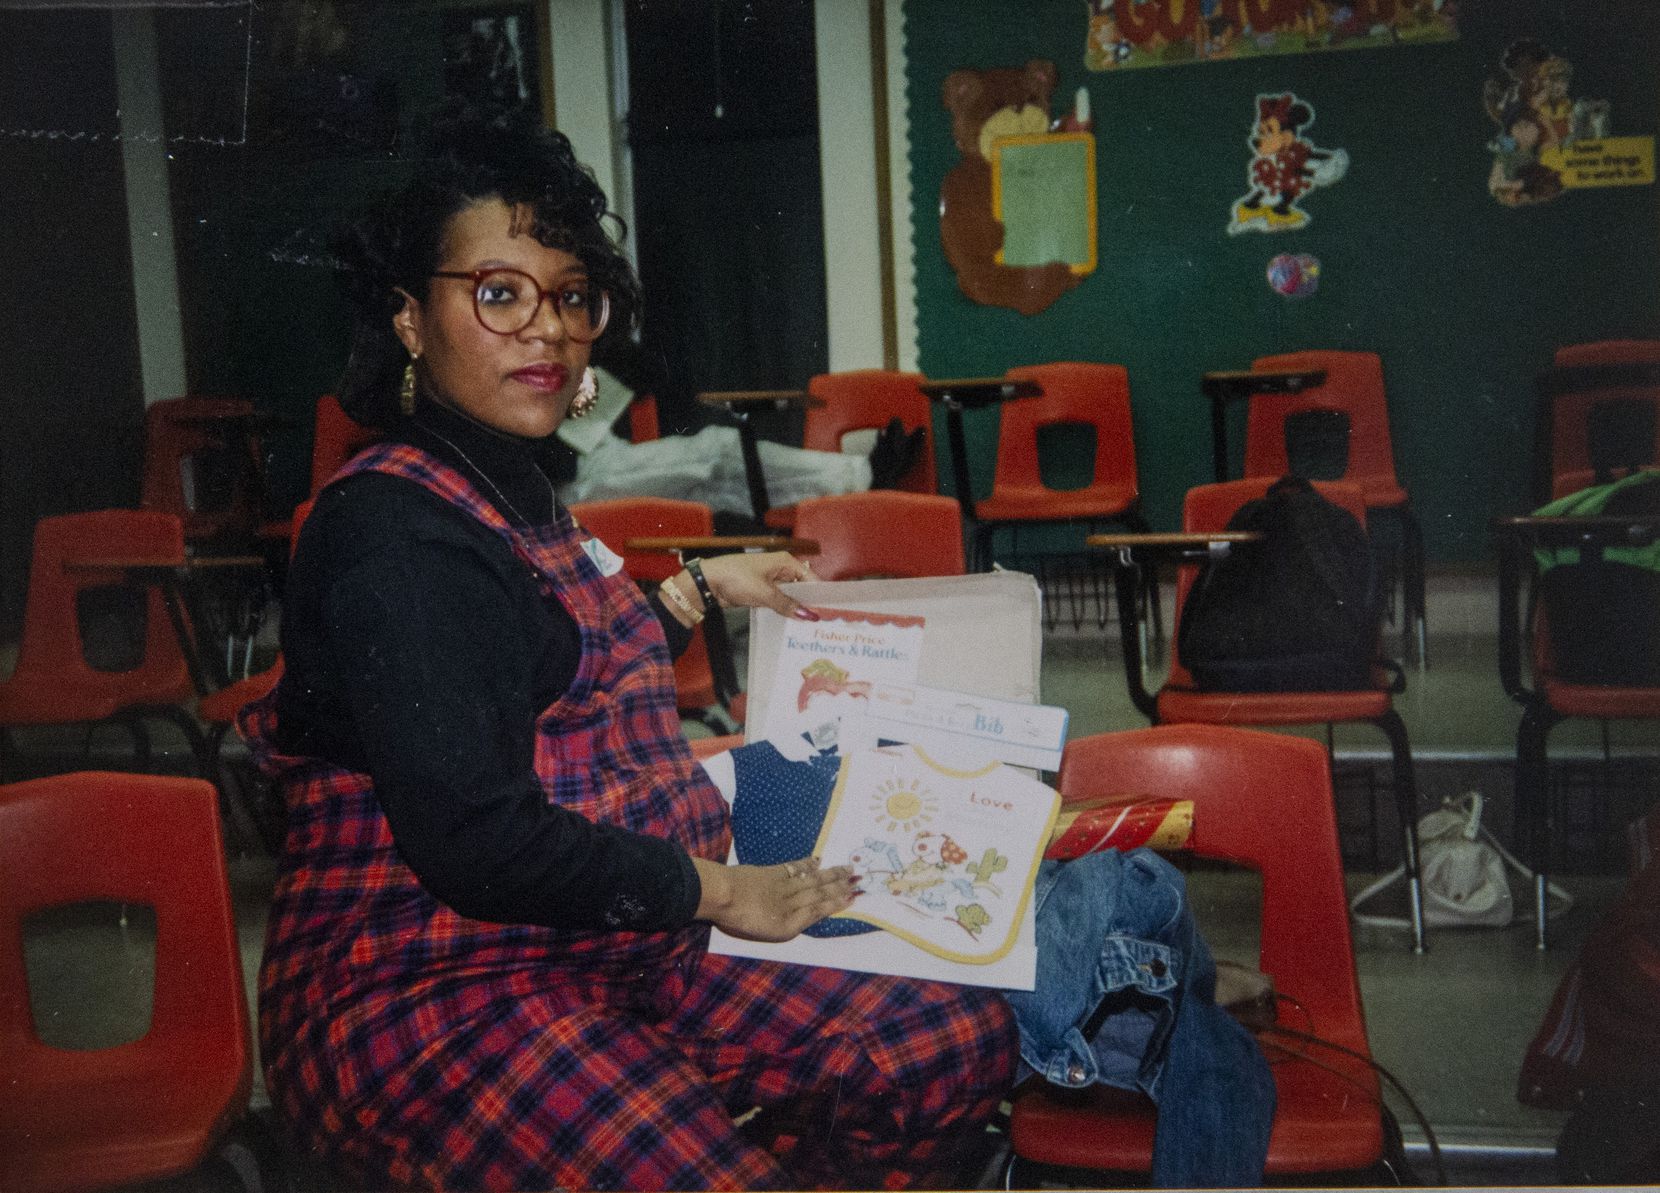 Donna Fields, who became pregnant by her boyfriend when she was 16, holds gifts from Rickie Rush during a baby shower he threw for her in his classroom at Skyline High School. After she gave birth to her son in 1991, she said, Rush gave her money — for a bassinet, clothes, rent and a car.